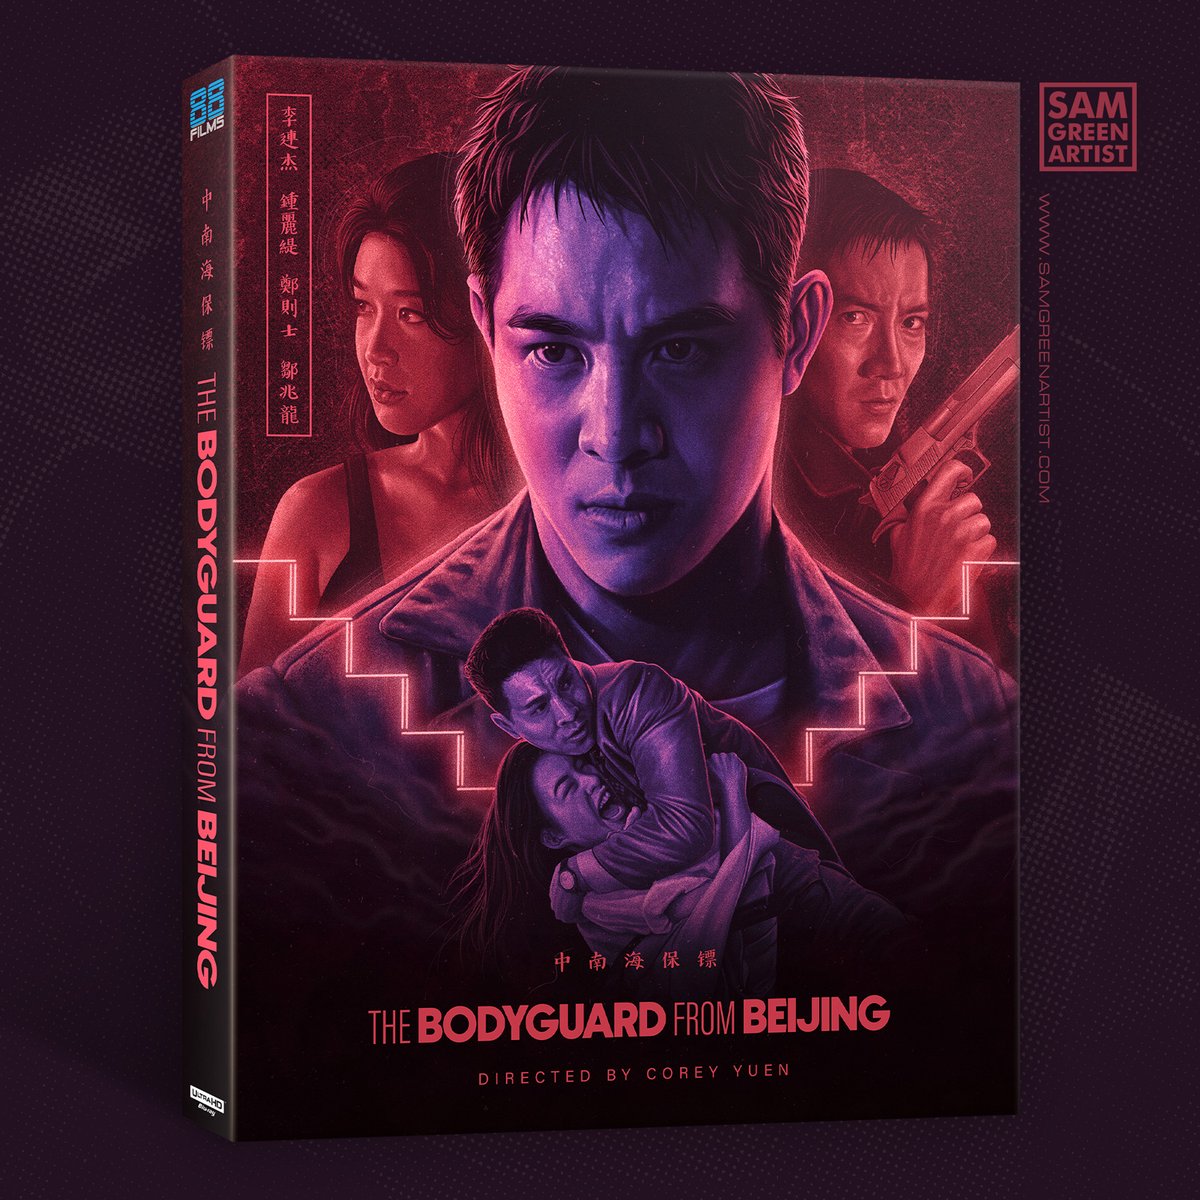 THE BODYGUARD FROM BEIJING

Looks like the cat is out of the bag and my new artwork for @88_Films upcoming release of The Bodyguard From Beijing is out there in the wild!

Had a lot of fun with this one! More collaborations with 88 Films on the way.

Painted in @Procreate